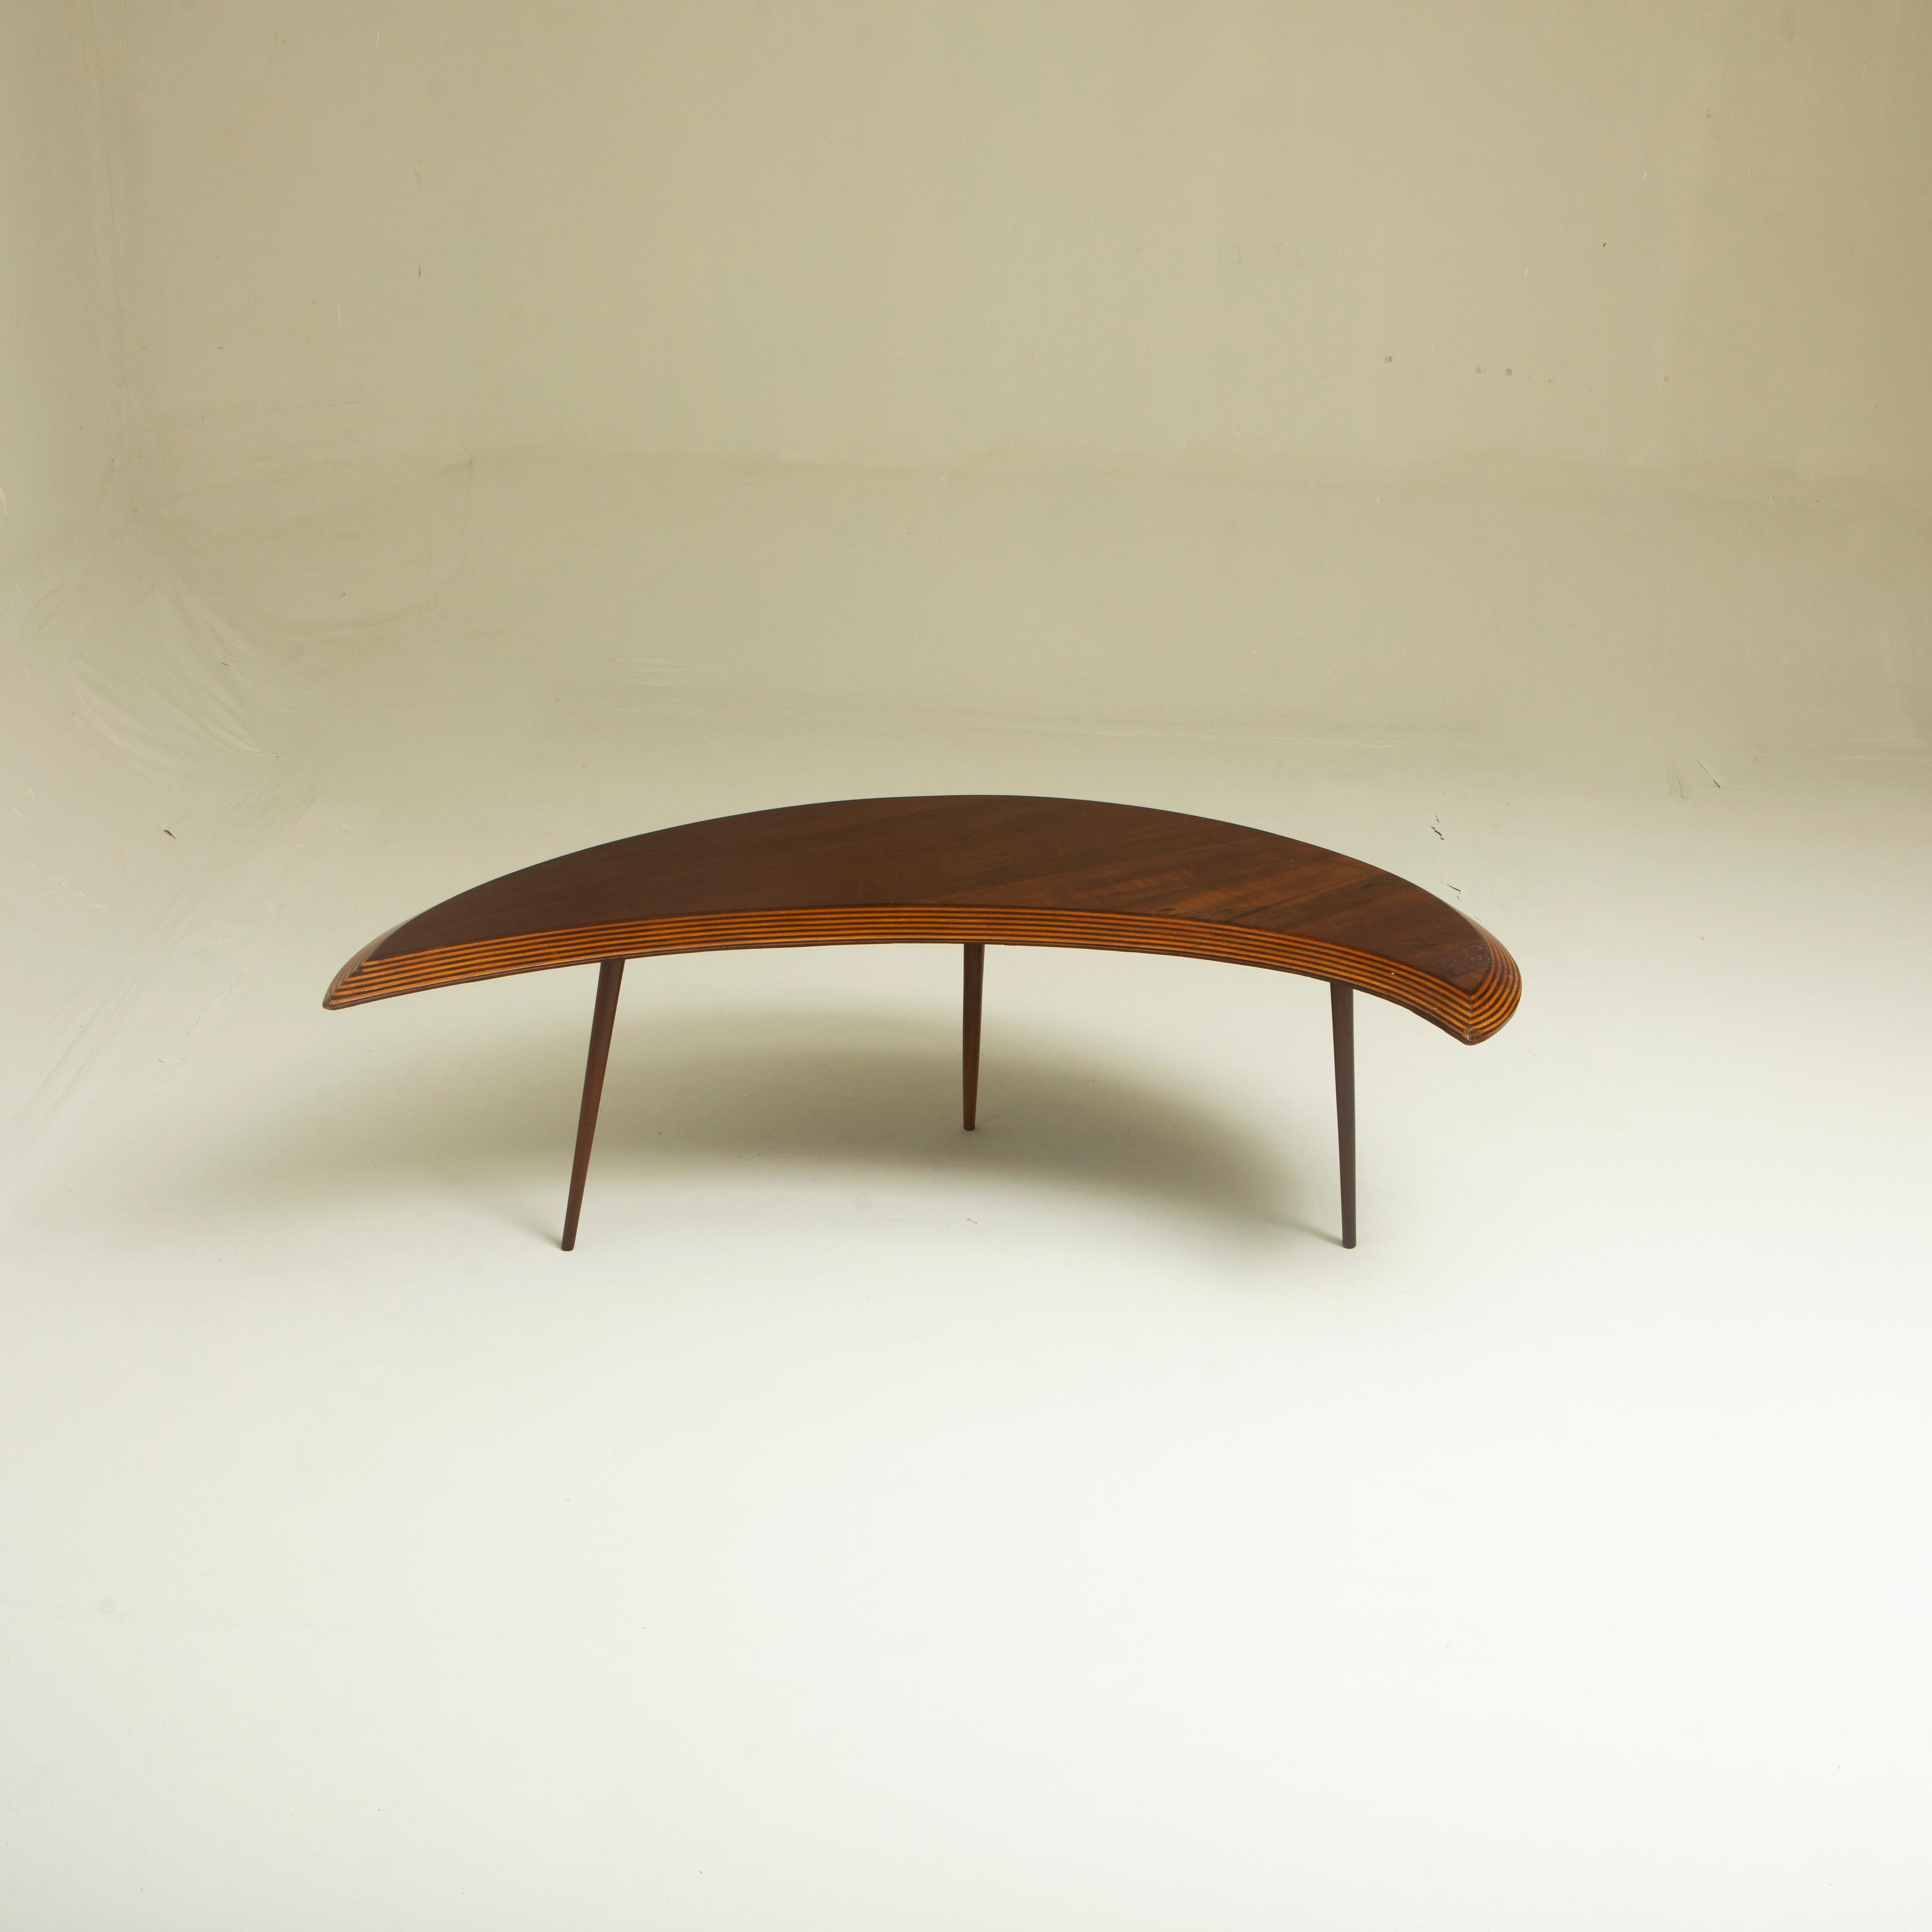 'Half Moon' Center Table by CIMO Studio, Brazil, 1950s

Center table structured in wood and plywood, with a half-moon design, supported on three solid wood legs, manufactured by CIMO Studio, circa 1950s.